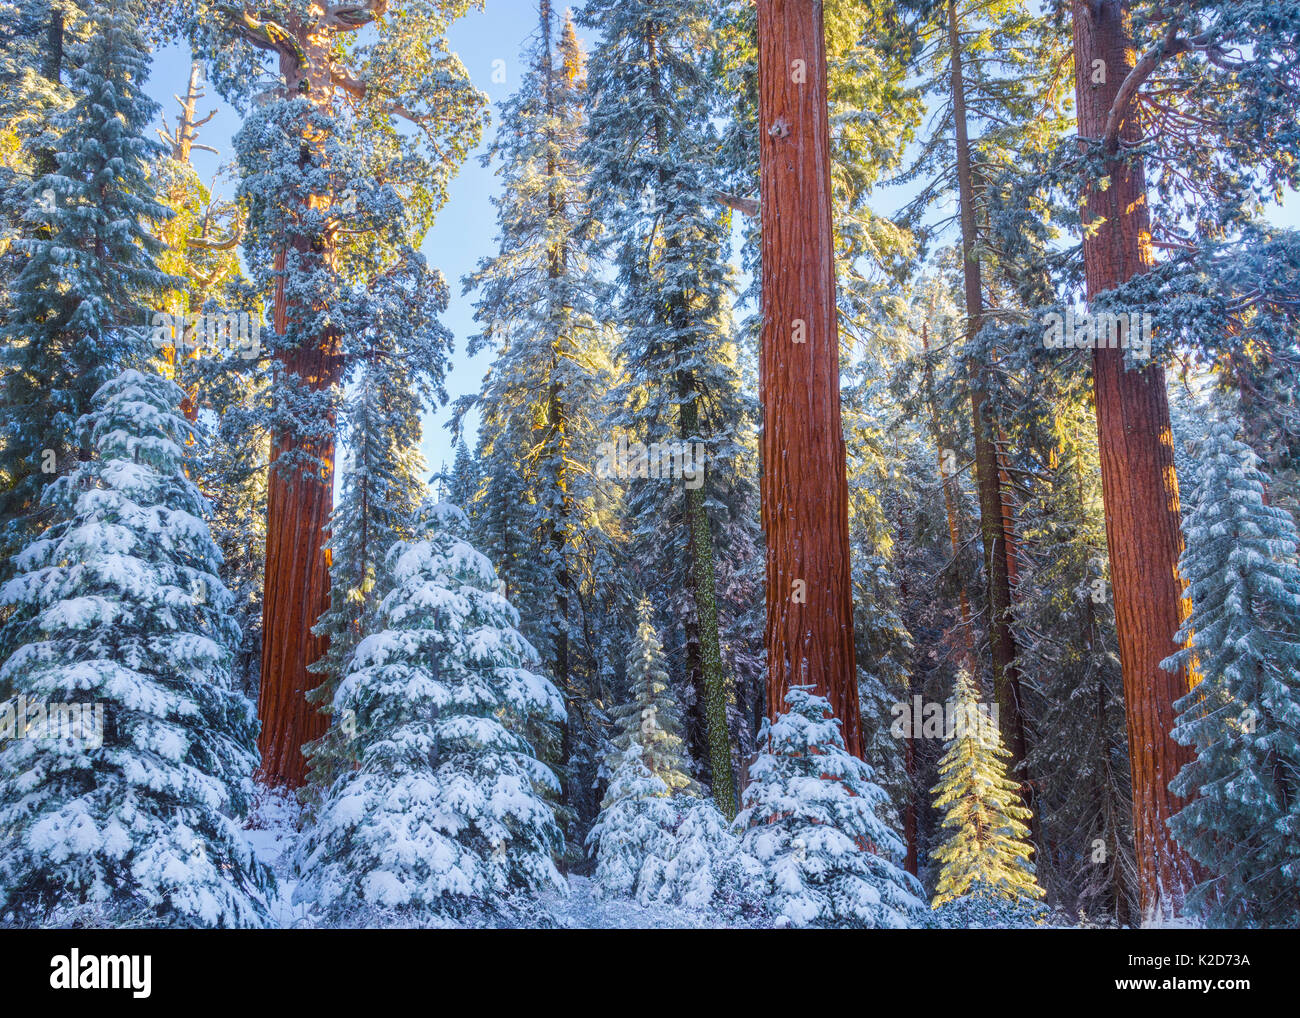 First rays of golden sunshine hit Giant Sequoias (Sequoiadendron giganteum) covered in a winter blanket of snow and frost, Grant Grove, Sequoia / Kings Canyon National Park, California, USA November Stock Photo